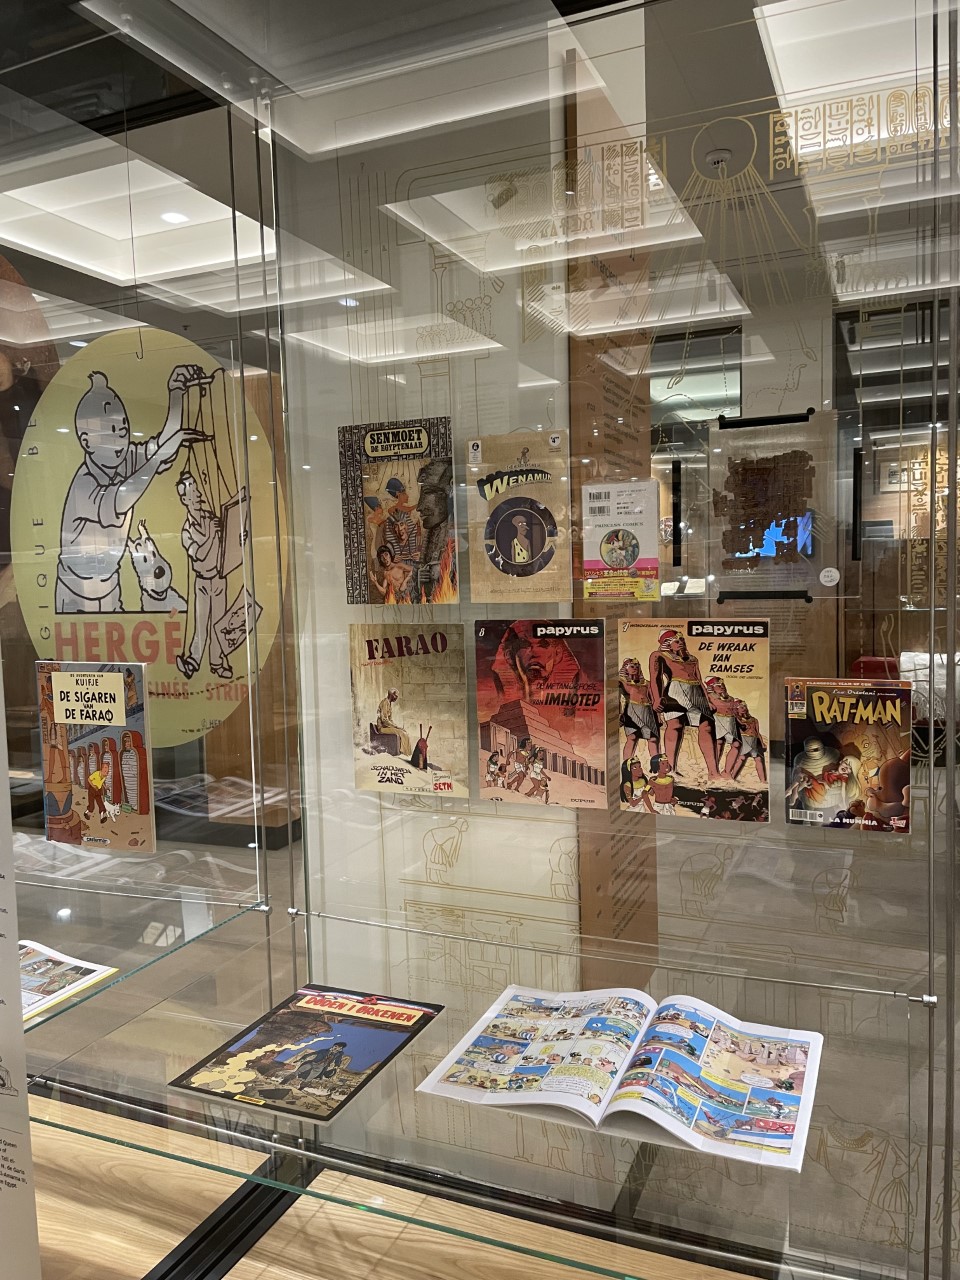 Photograph of museum display case containing comic books about Ancient Egypt